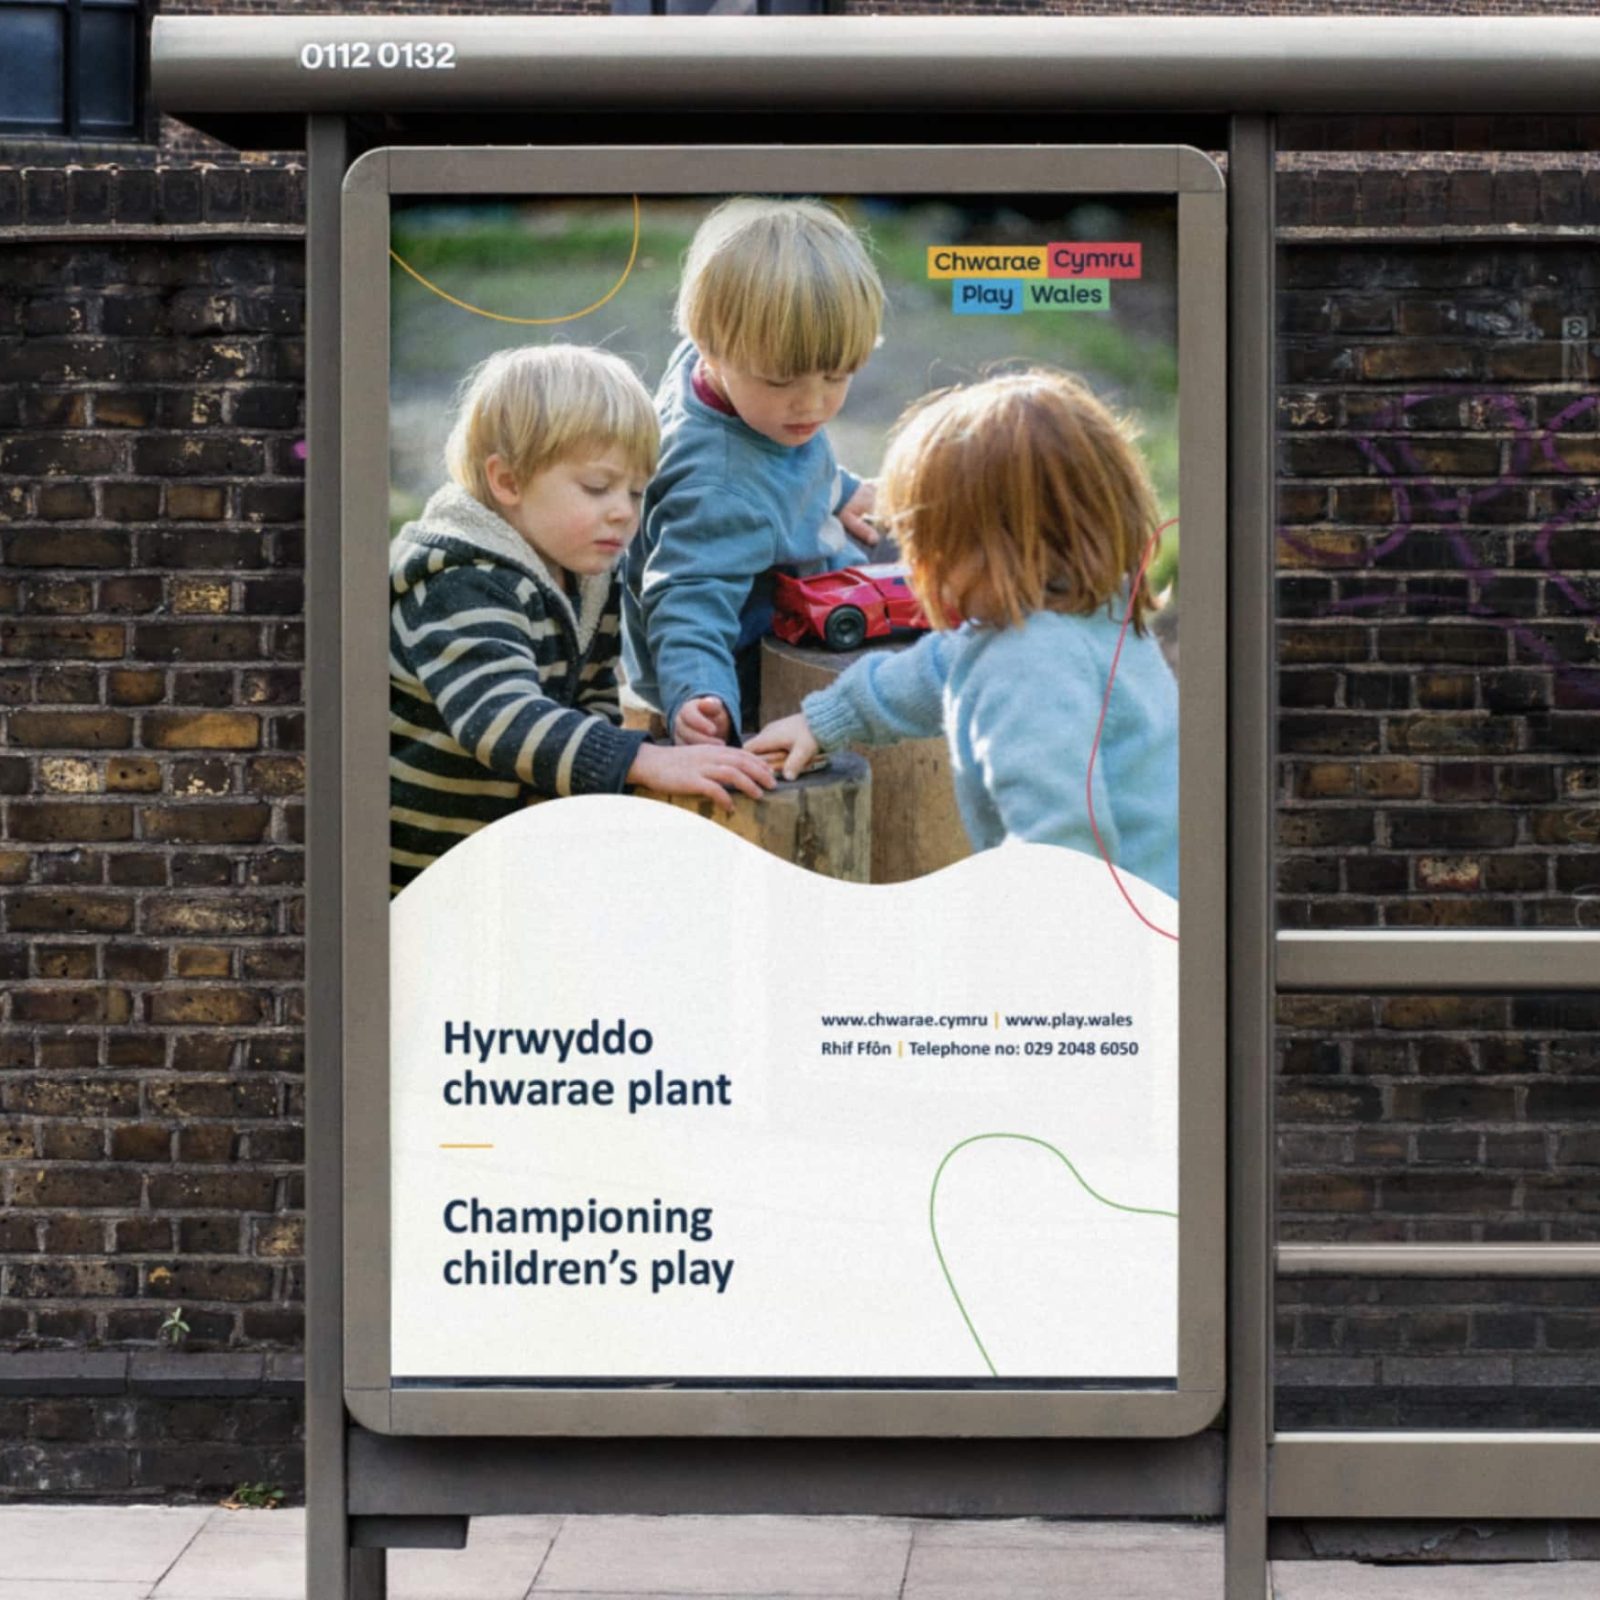 An outdoor advertisement, designed by a prominent Brand Agency in Cardiff, features an image of three young children playing with a red toy car on a low wall. This display promotes children's play with bilingual text